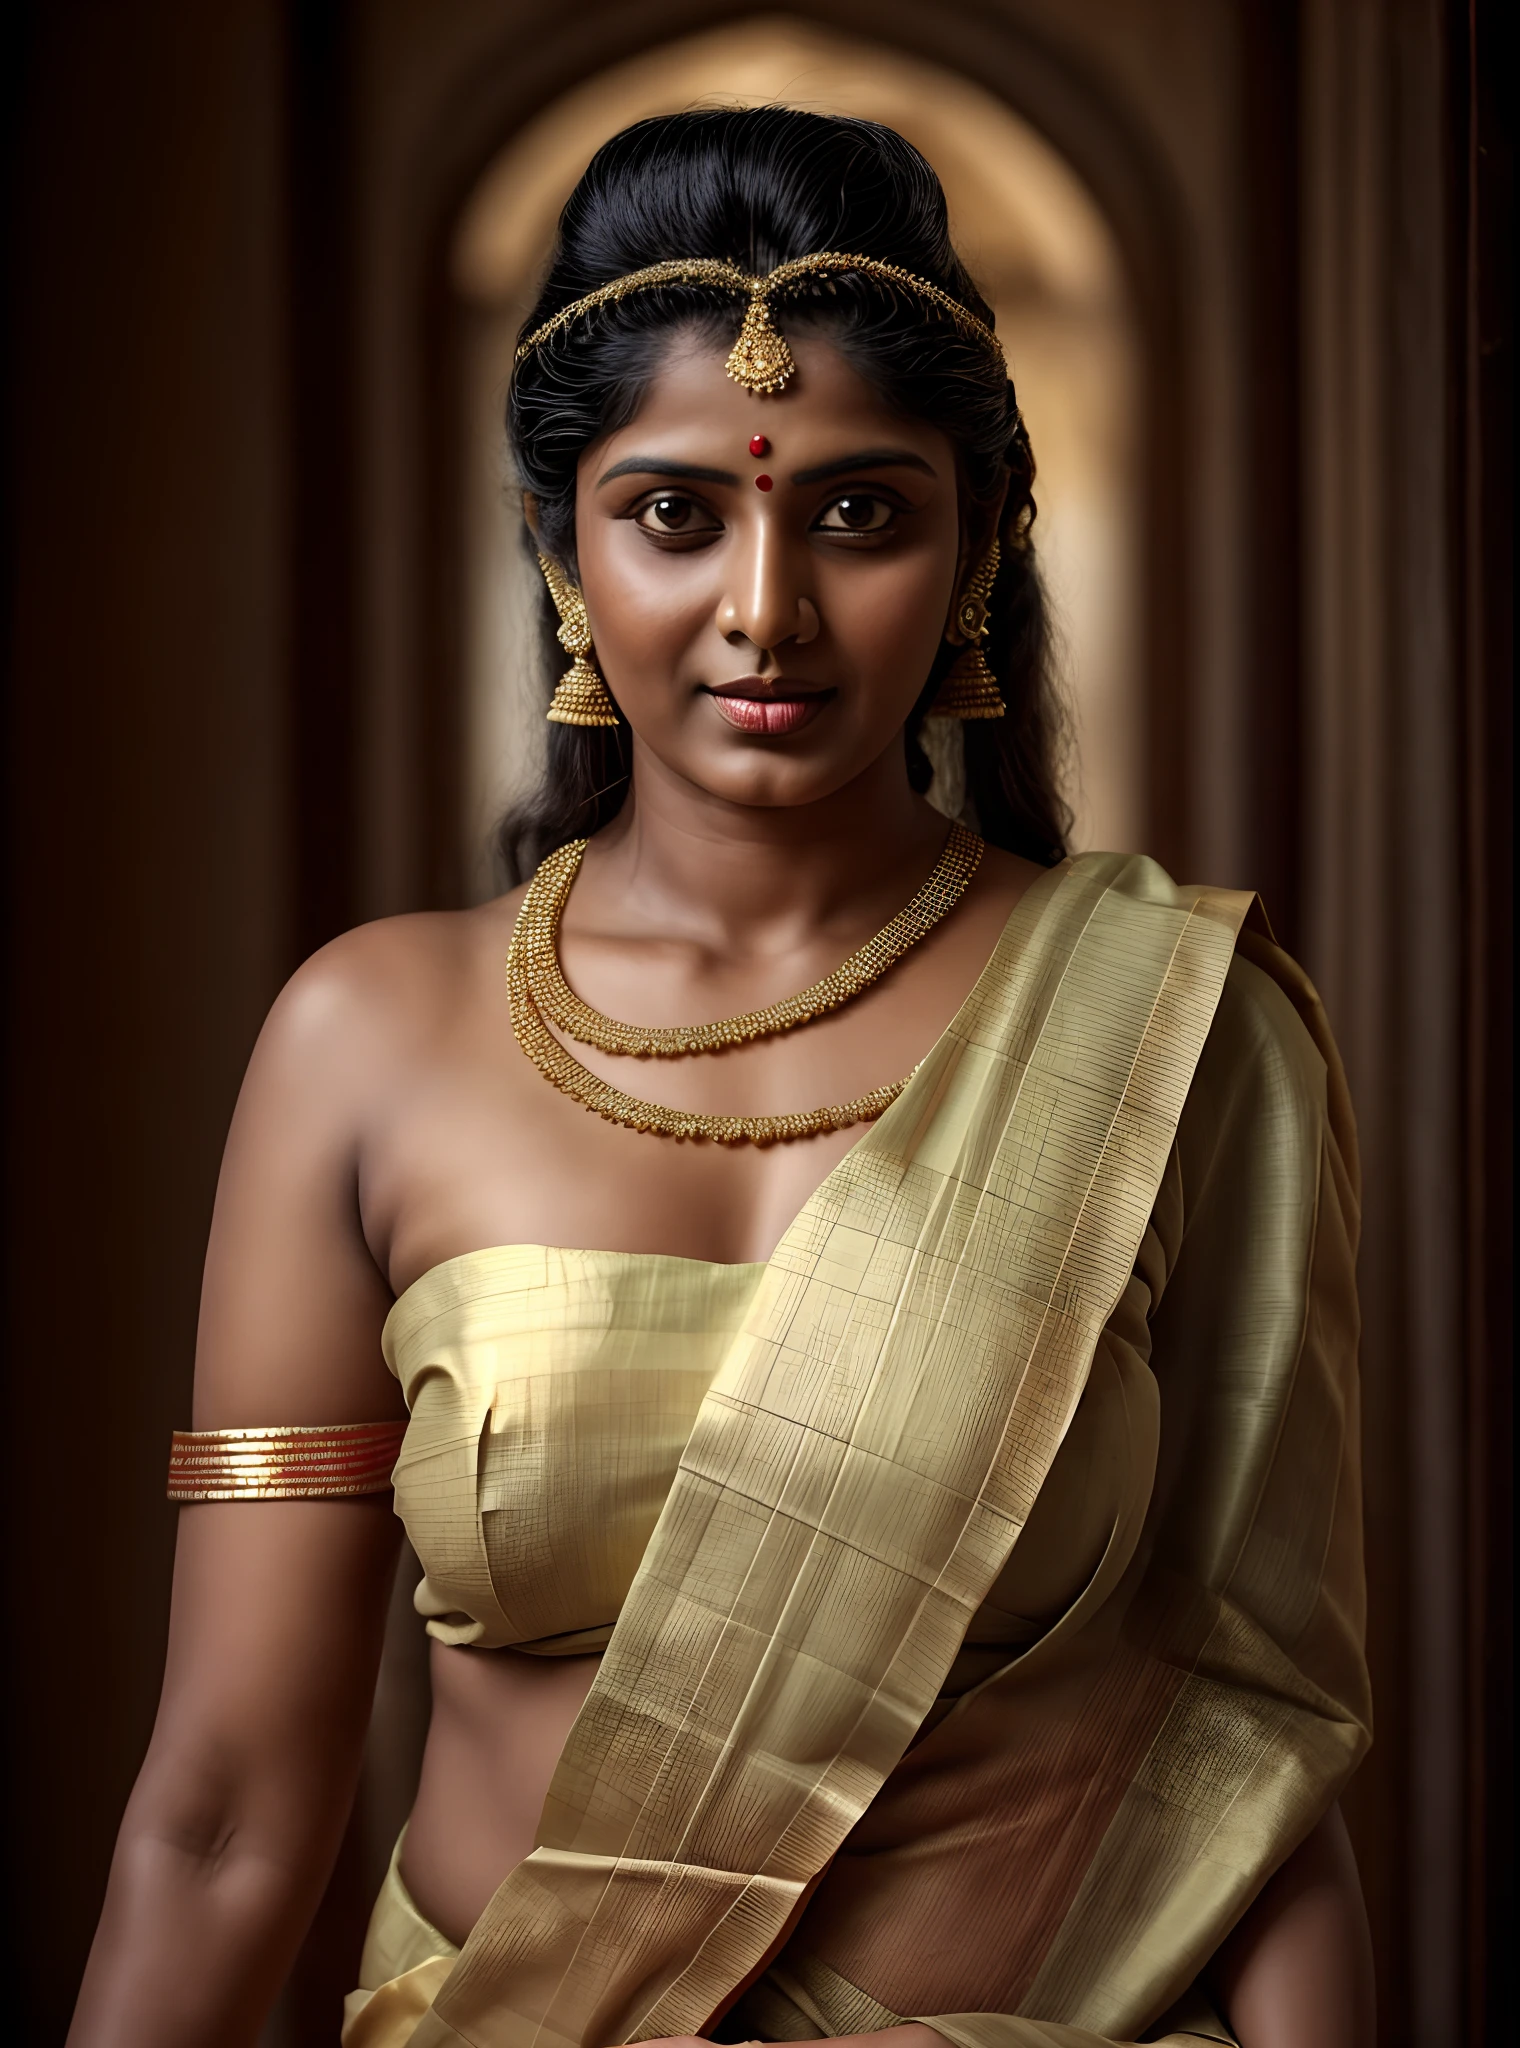 An Extremely gorgeous And beAutiful BengAli villAge womAn, 45 號, pAle white sKin, sensuAl AppeAling body, perfect thicK And chubby BeAuty, weAring sAree bAre-chested, weAring A BengAli-style sAree without A blouse,, ethnic vintAge bengAli villAge womAn, bengAli style sAree, The sAri wAs worn without A blouse And petticoAt before the British RAj, bAring one's chest or being blouseless,  BengAlis A.K.A. Bongs Are Known for their unique BengAli fAshion sense (the wAy they don thAt sAri mAKes you go wow), Pre British RAj, Pre coloniAl erA, BengAli WomAn drAping sAri without blouse is A normAl thing in pre British ErA, bong womAn,